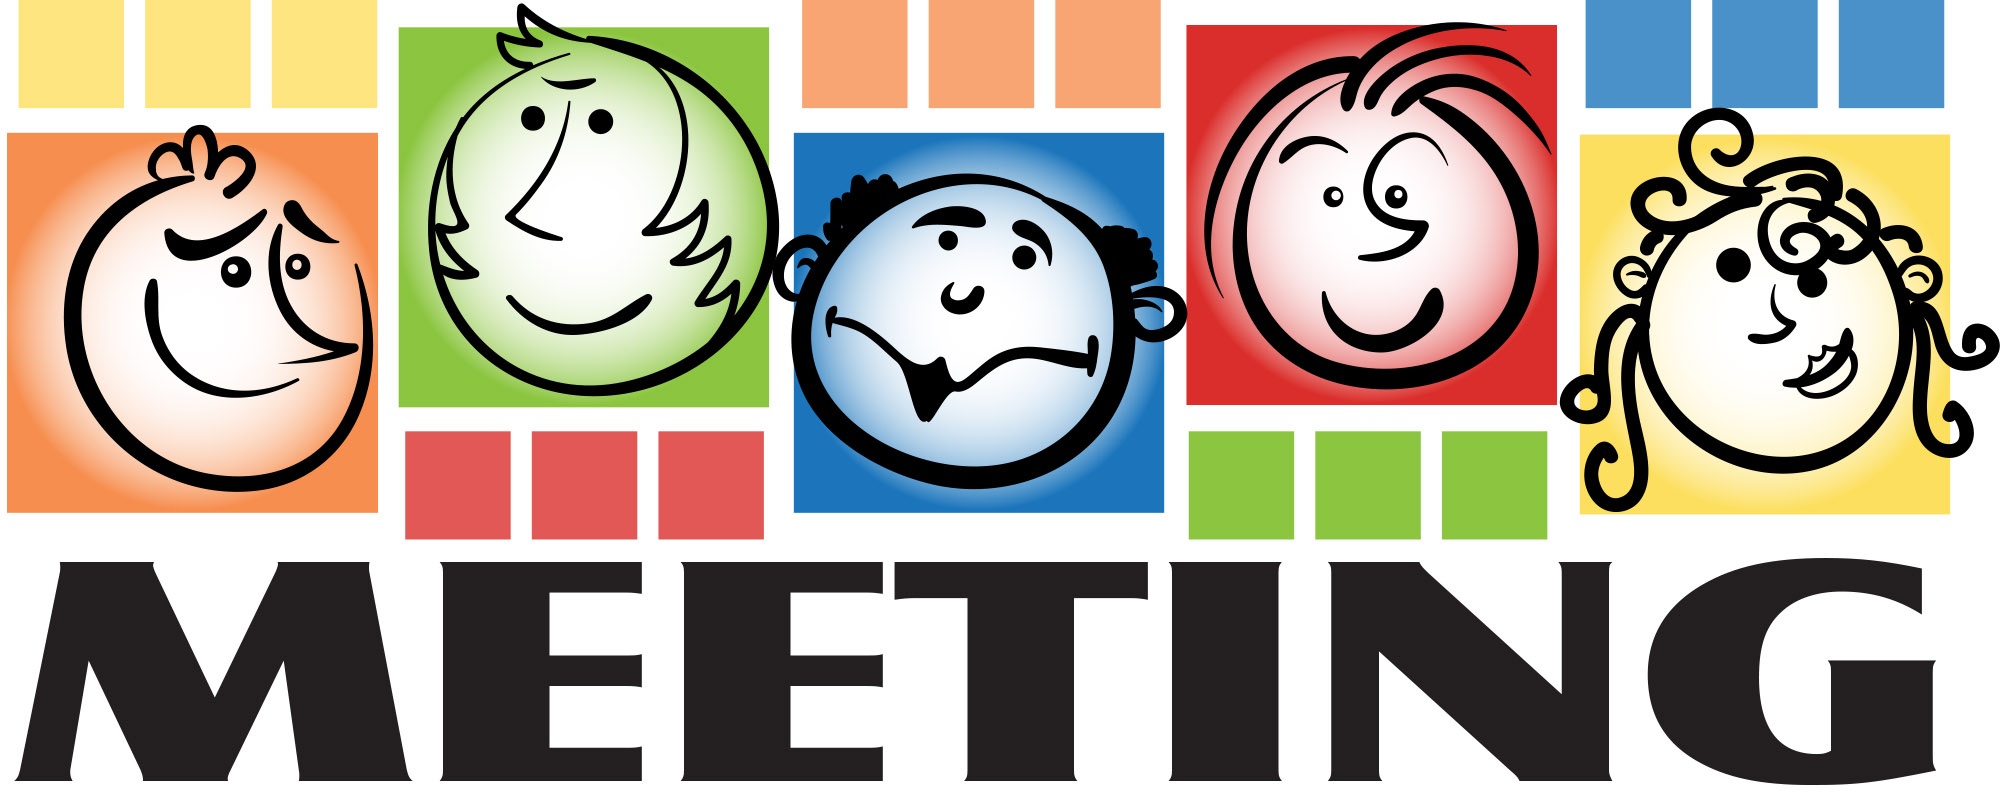 free clipart of business meetings - photo #46